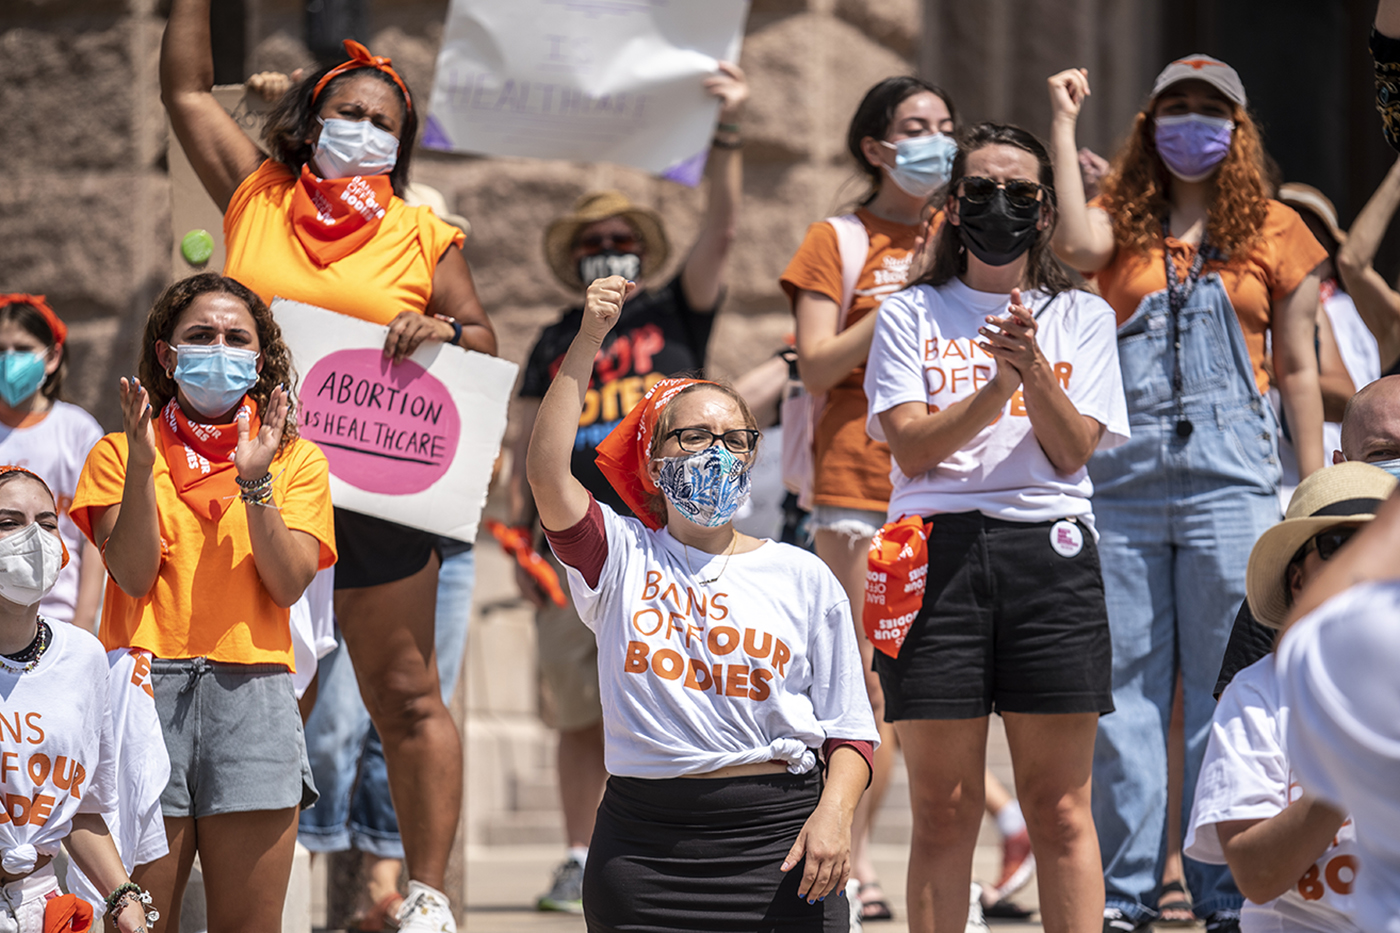 pro-choice protesters in austin yelling and raising their firsts while wearing orange and white shirts that say 